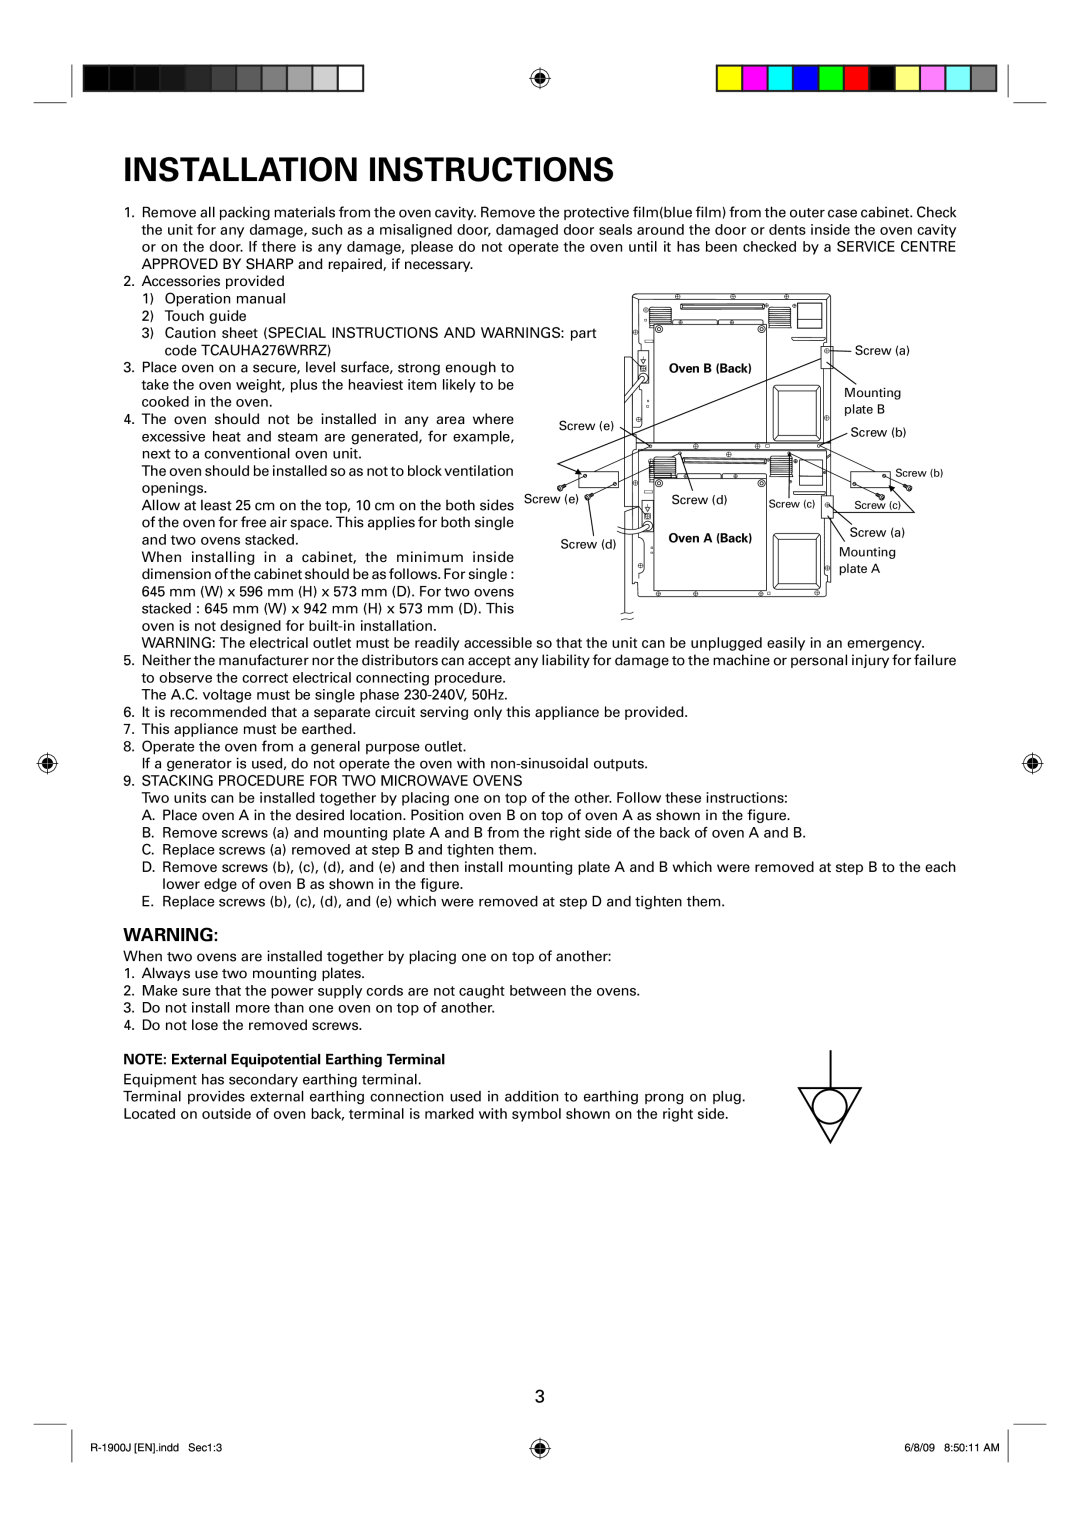 Sharp R-1900J operation manual Installation Instructions, NOTE External Equipotential Earthing Terminal 